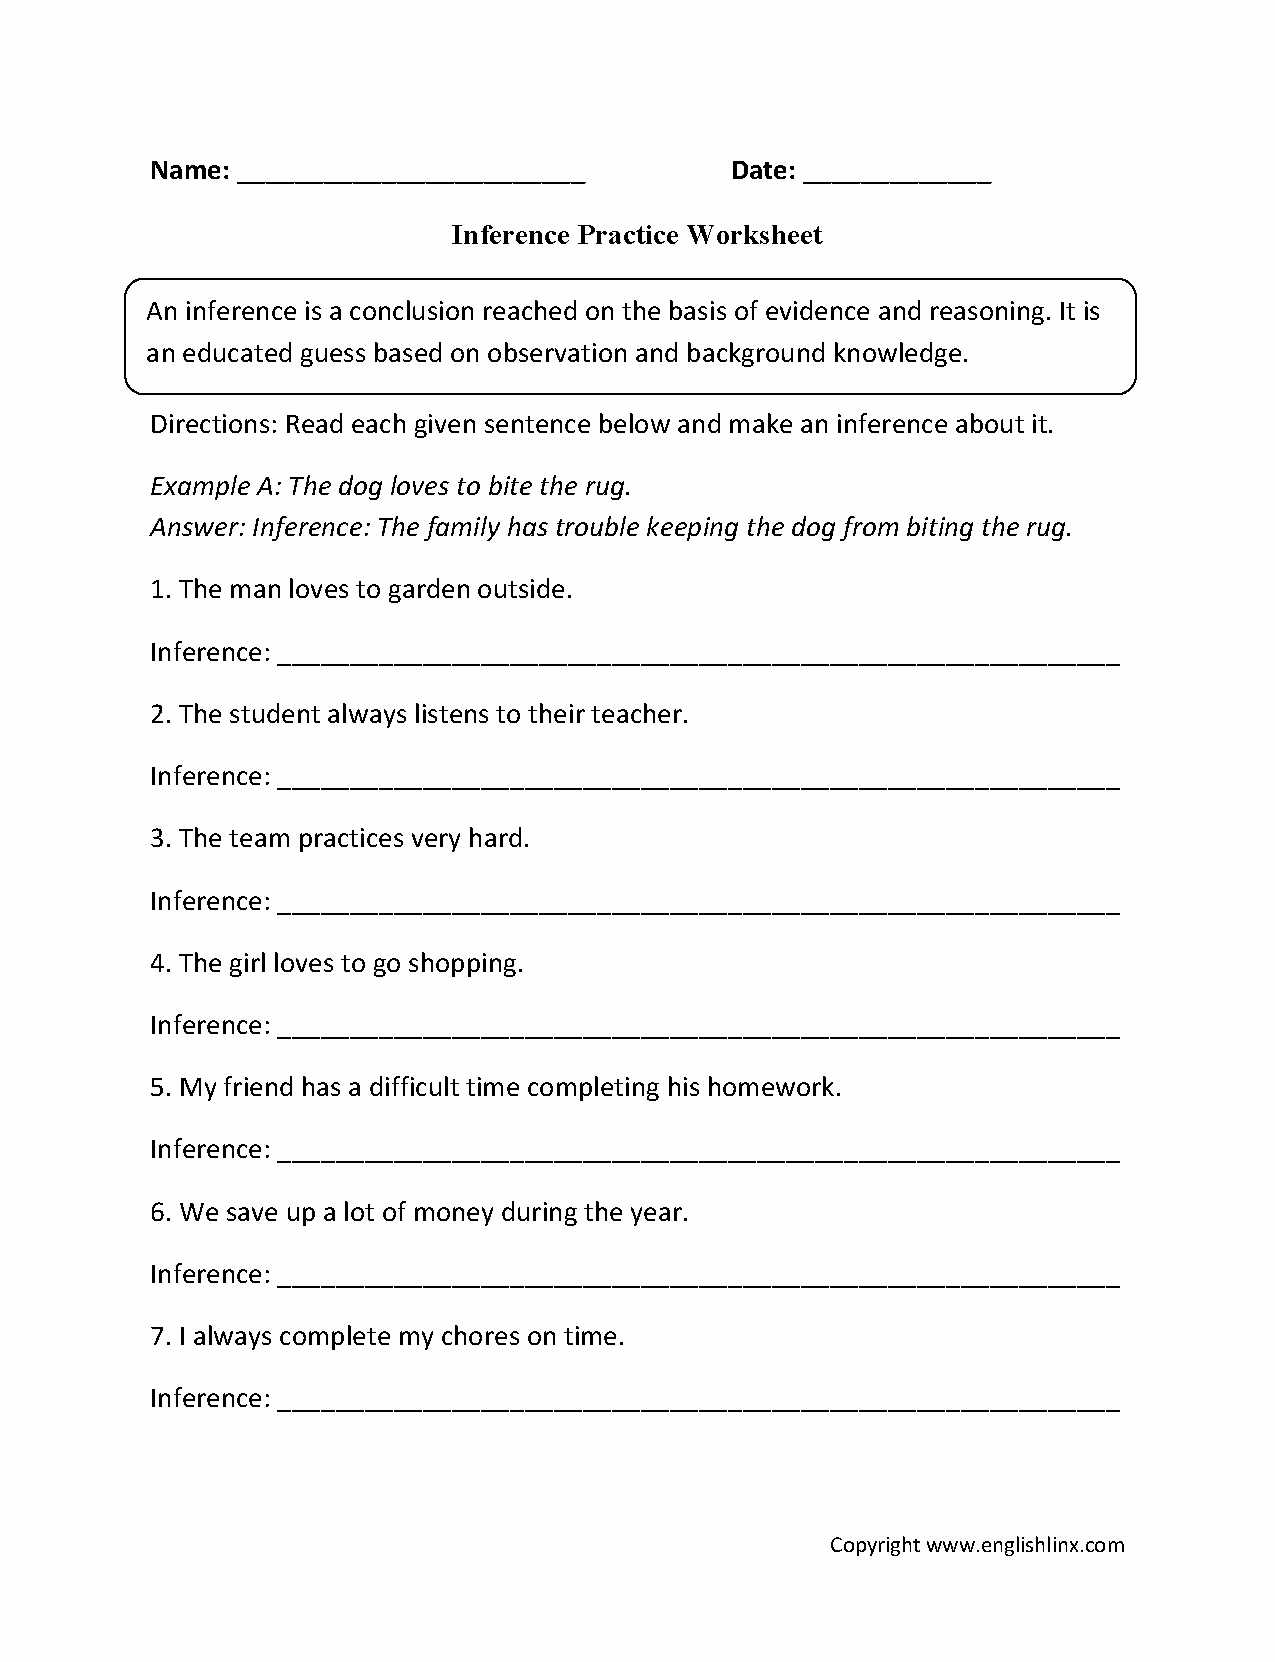 Gene Mutations Worksheet Lesson Plans Inc 2007 Answers together with Free 7th Grade Science Worksheets 7rd Grade Free